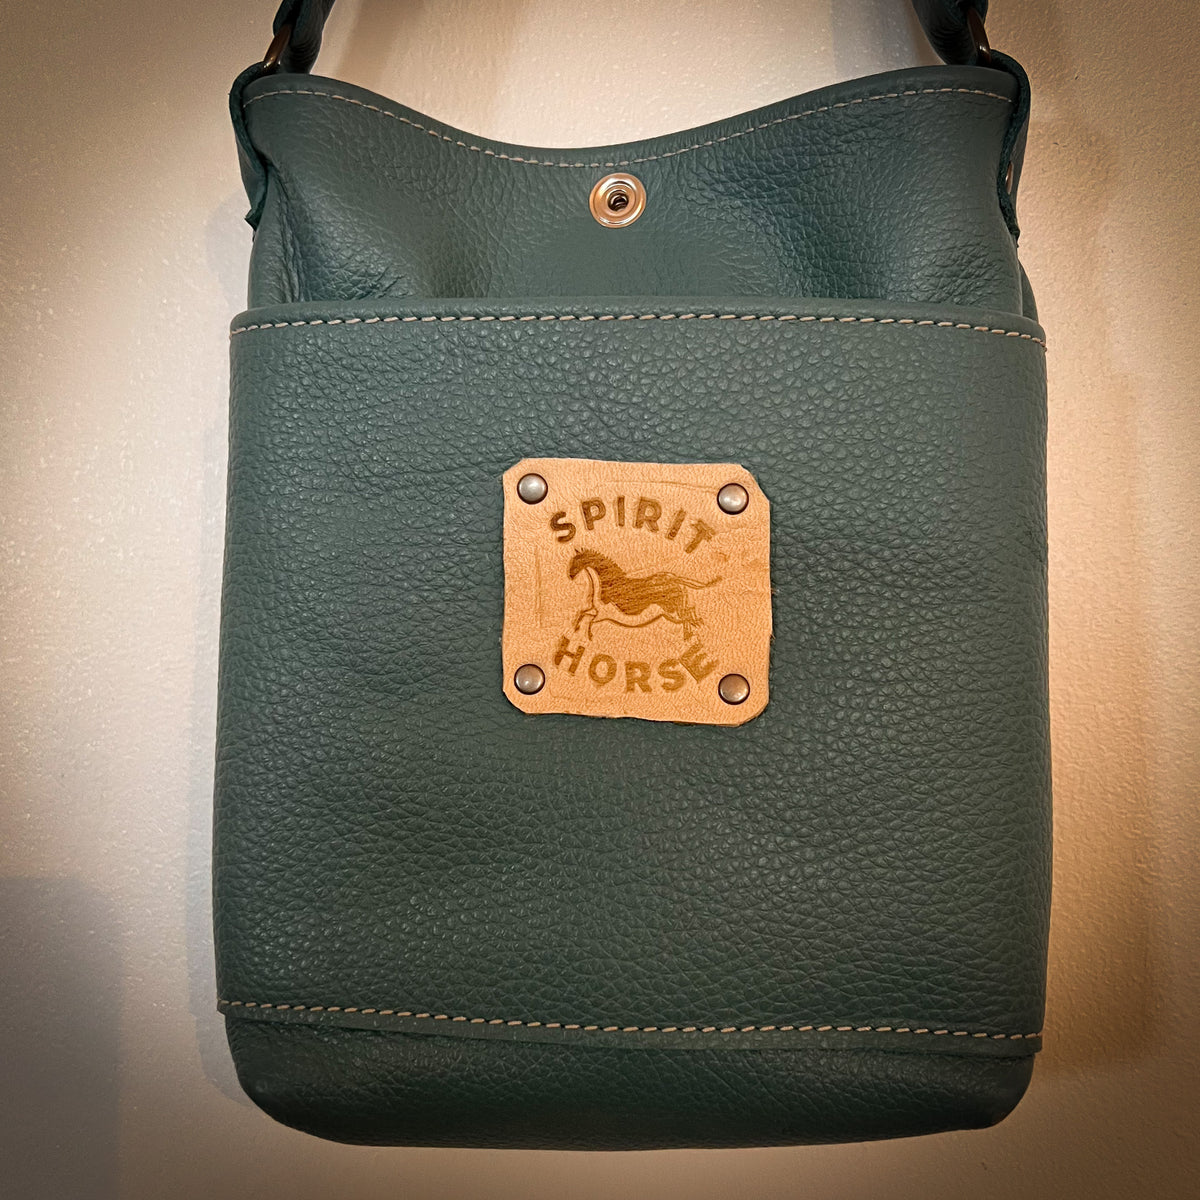 Lynnie Bag in Blue with Blue Bay Horses!